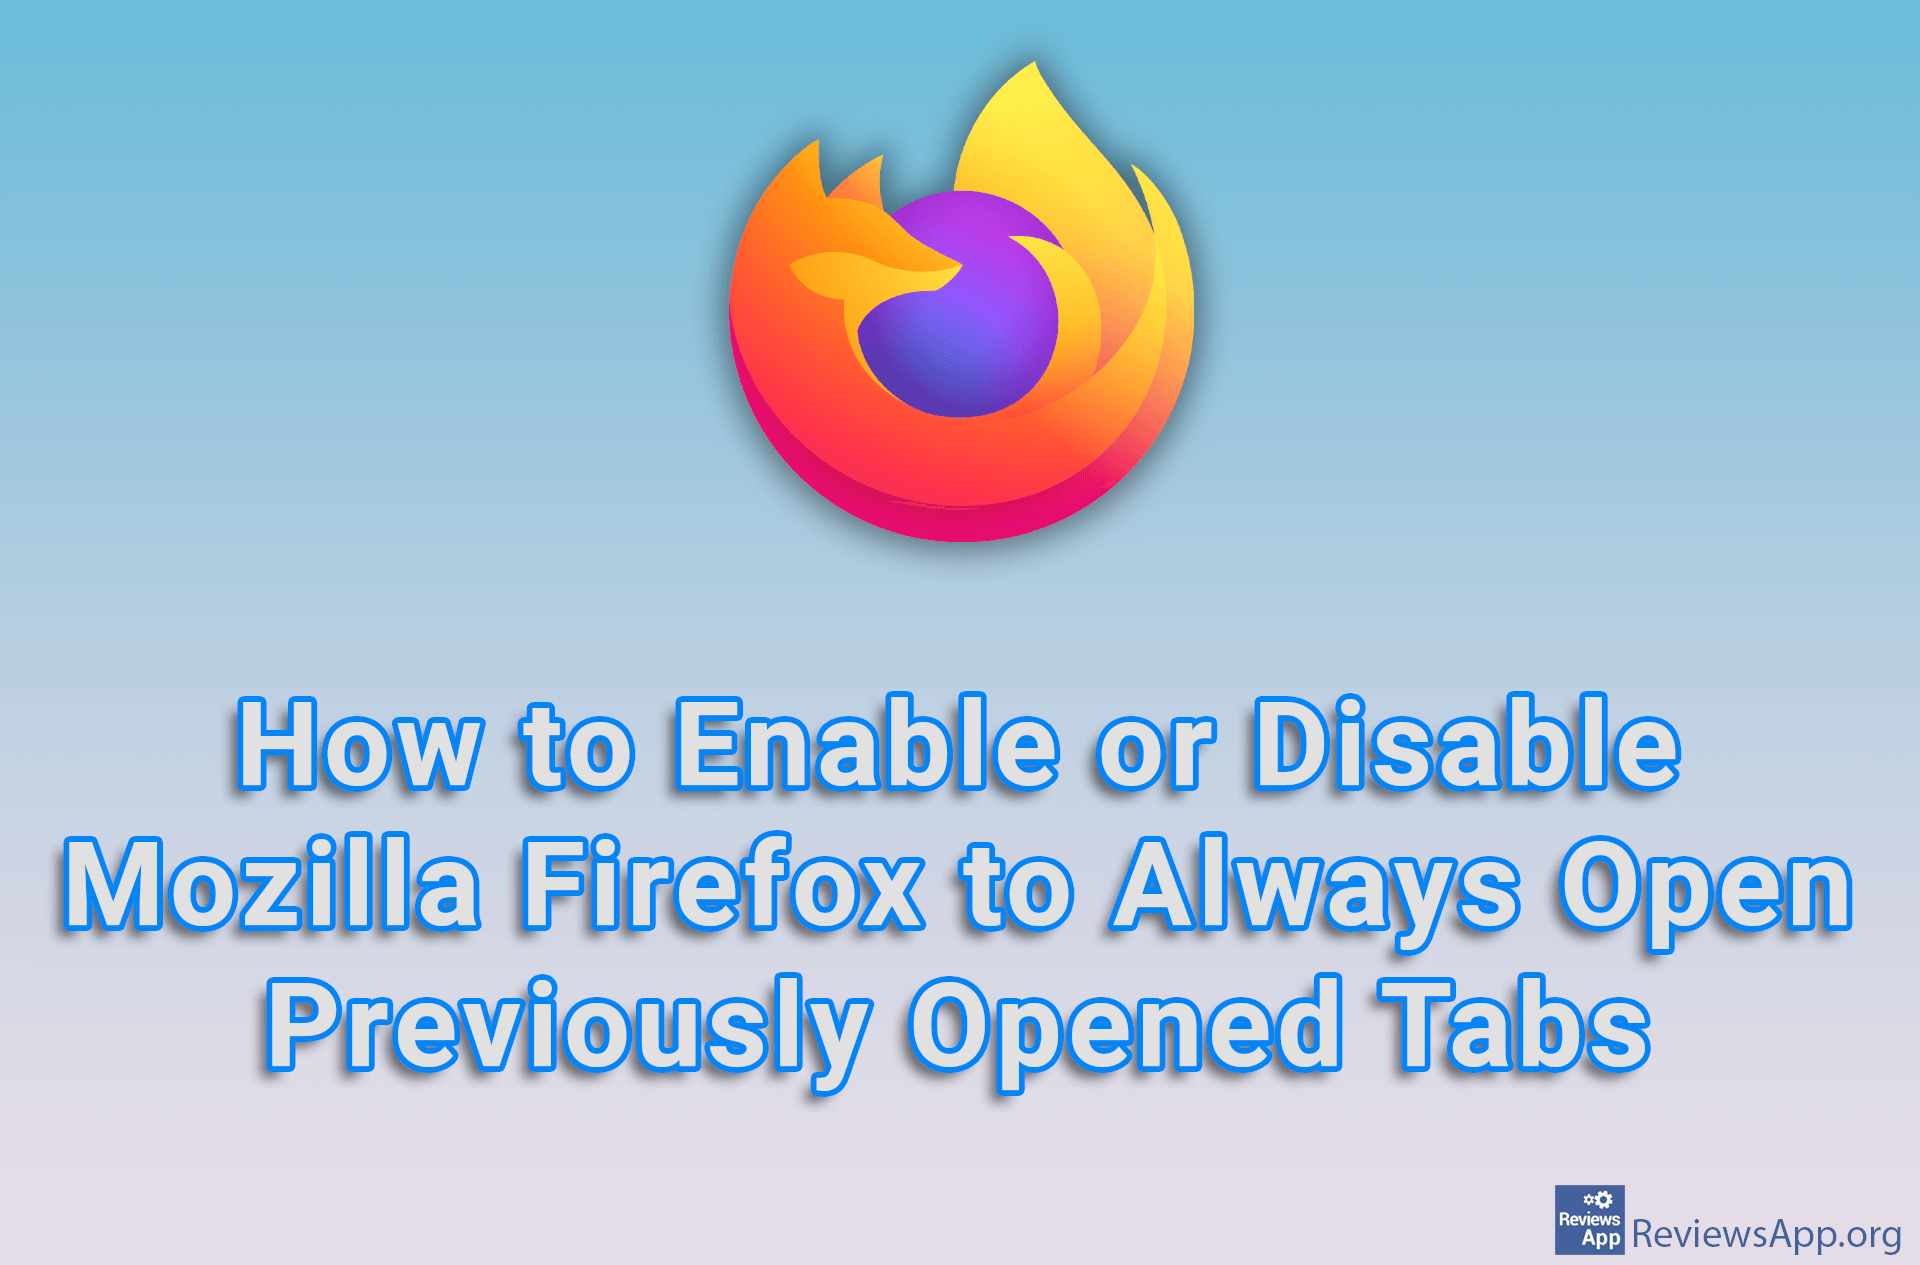 How to Enable or Disable Mozilla Firefox to Always Open Previously Opened Tabs